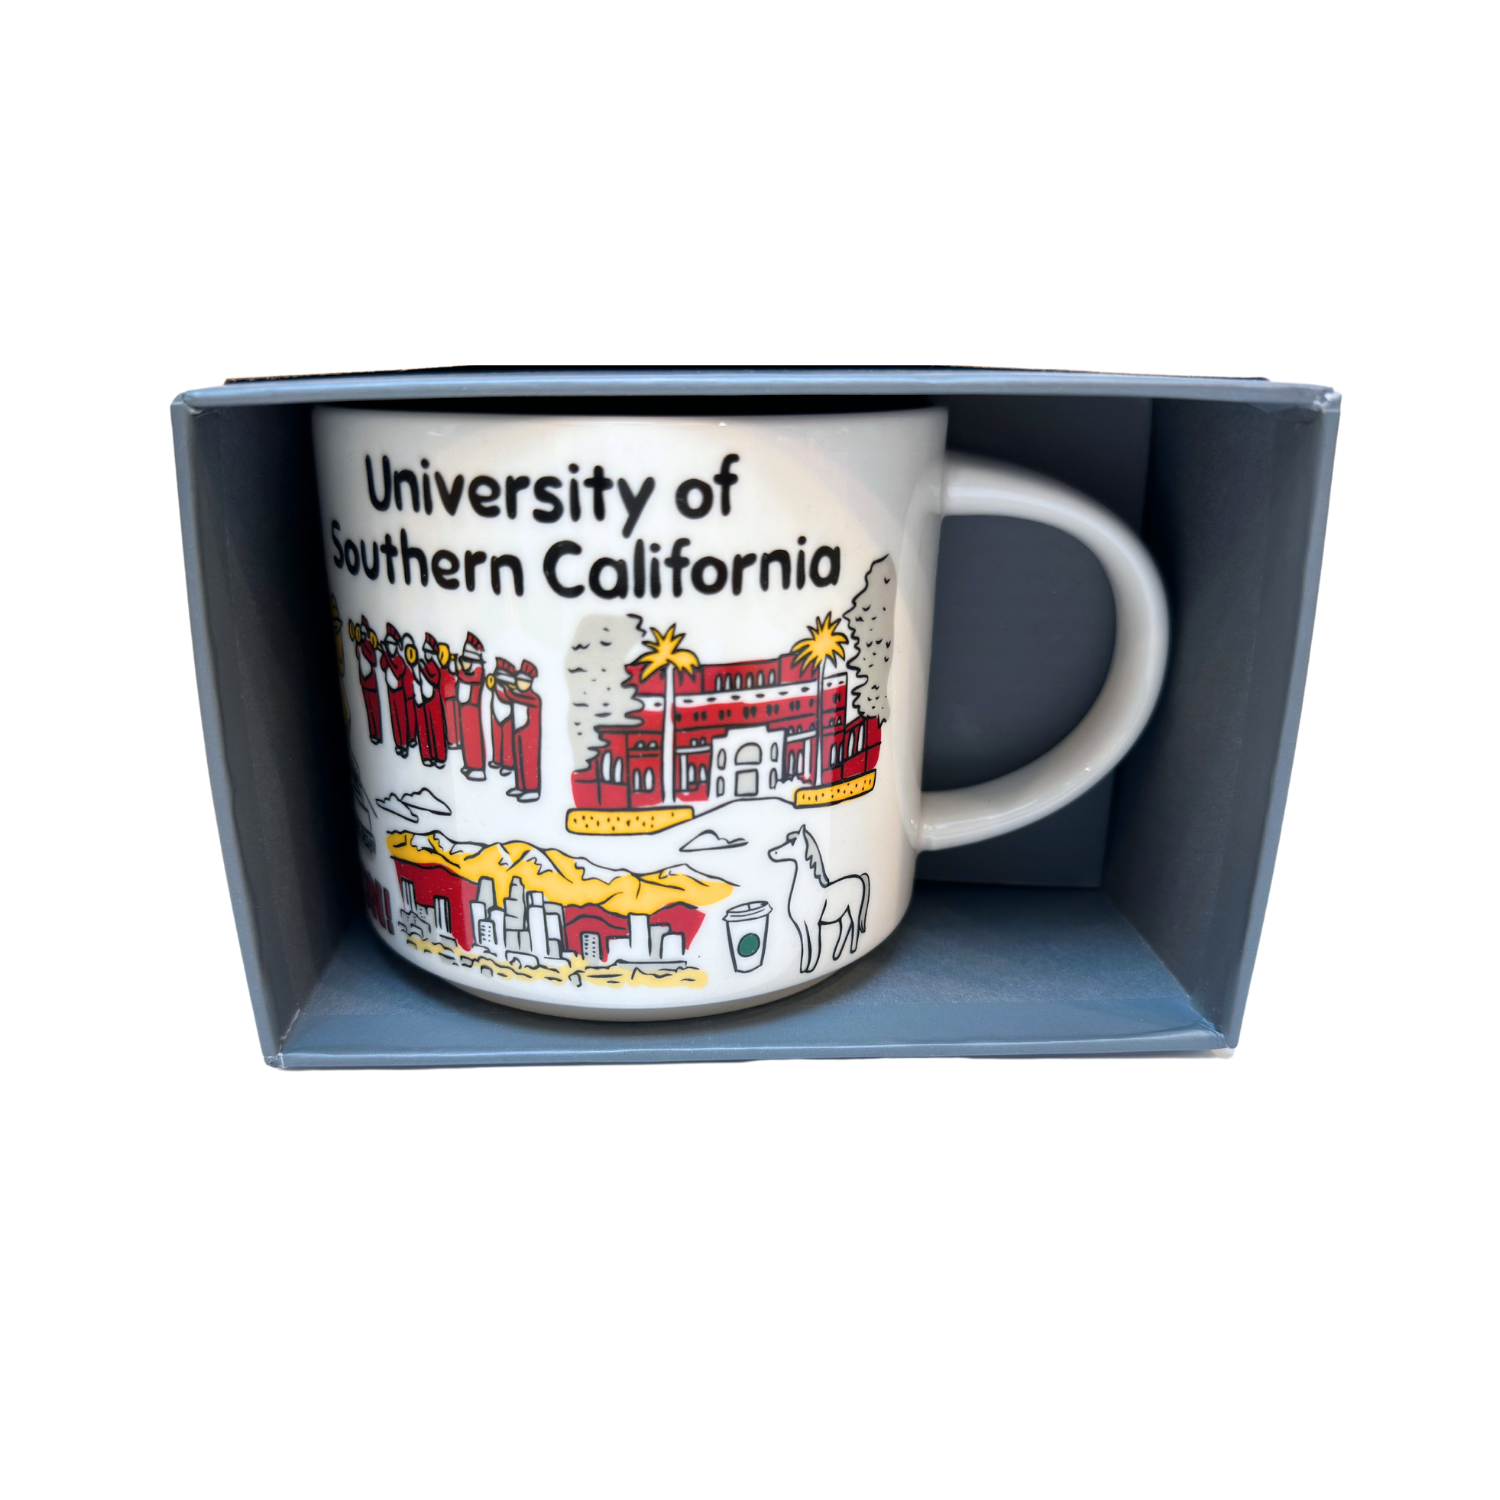 Starbucks Been There Series Campus Collection University of Southern California Ceramic Mug, 14 Oz